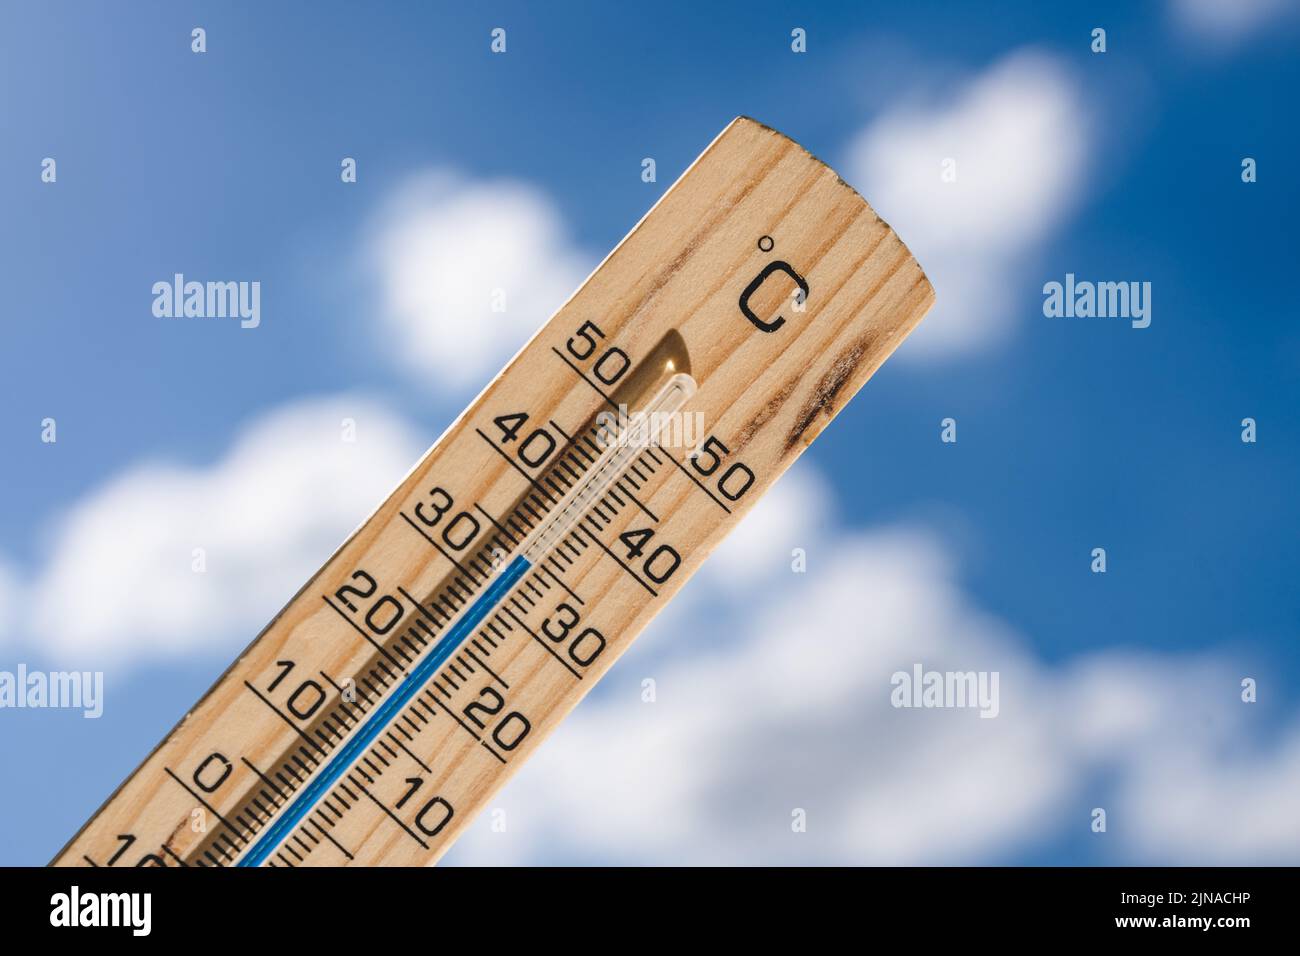 Thermometer Made Of Wood With The Temperature 35 Degrees Celsius, Symbol Image Heat And Warmth In Summer, High Temperatures Stock Photo